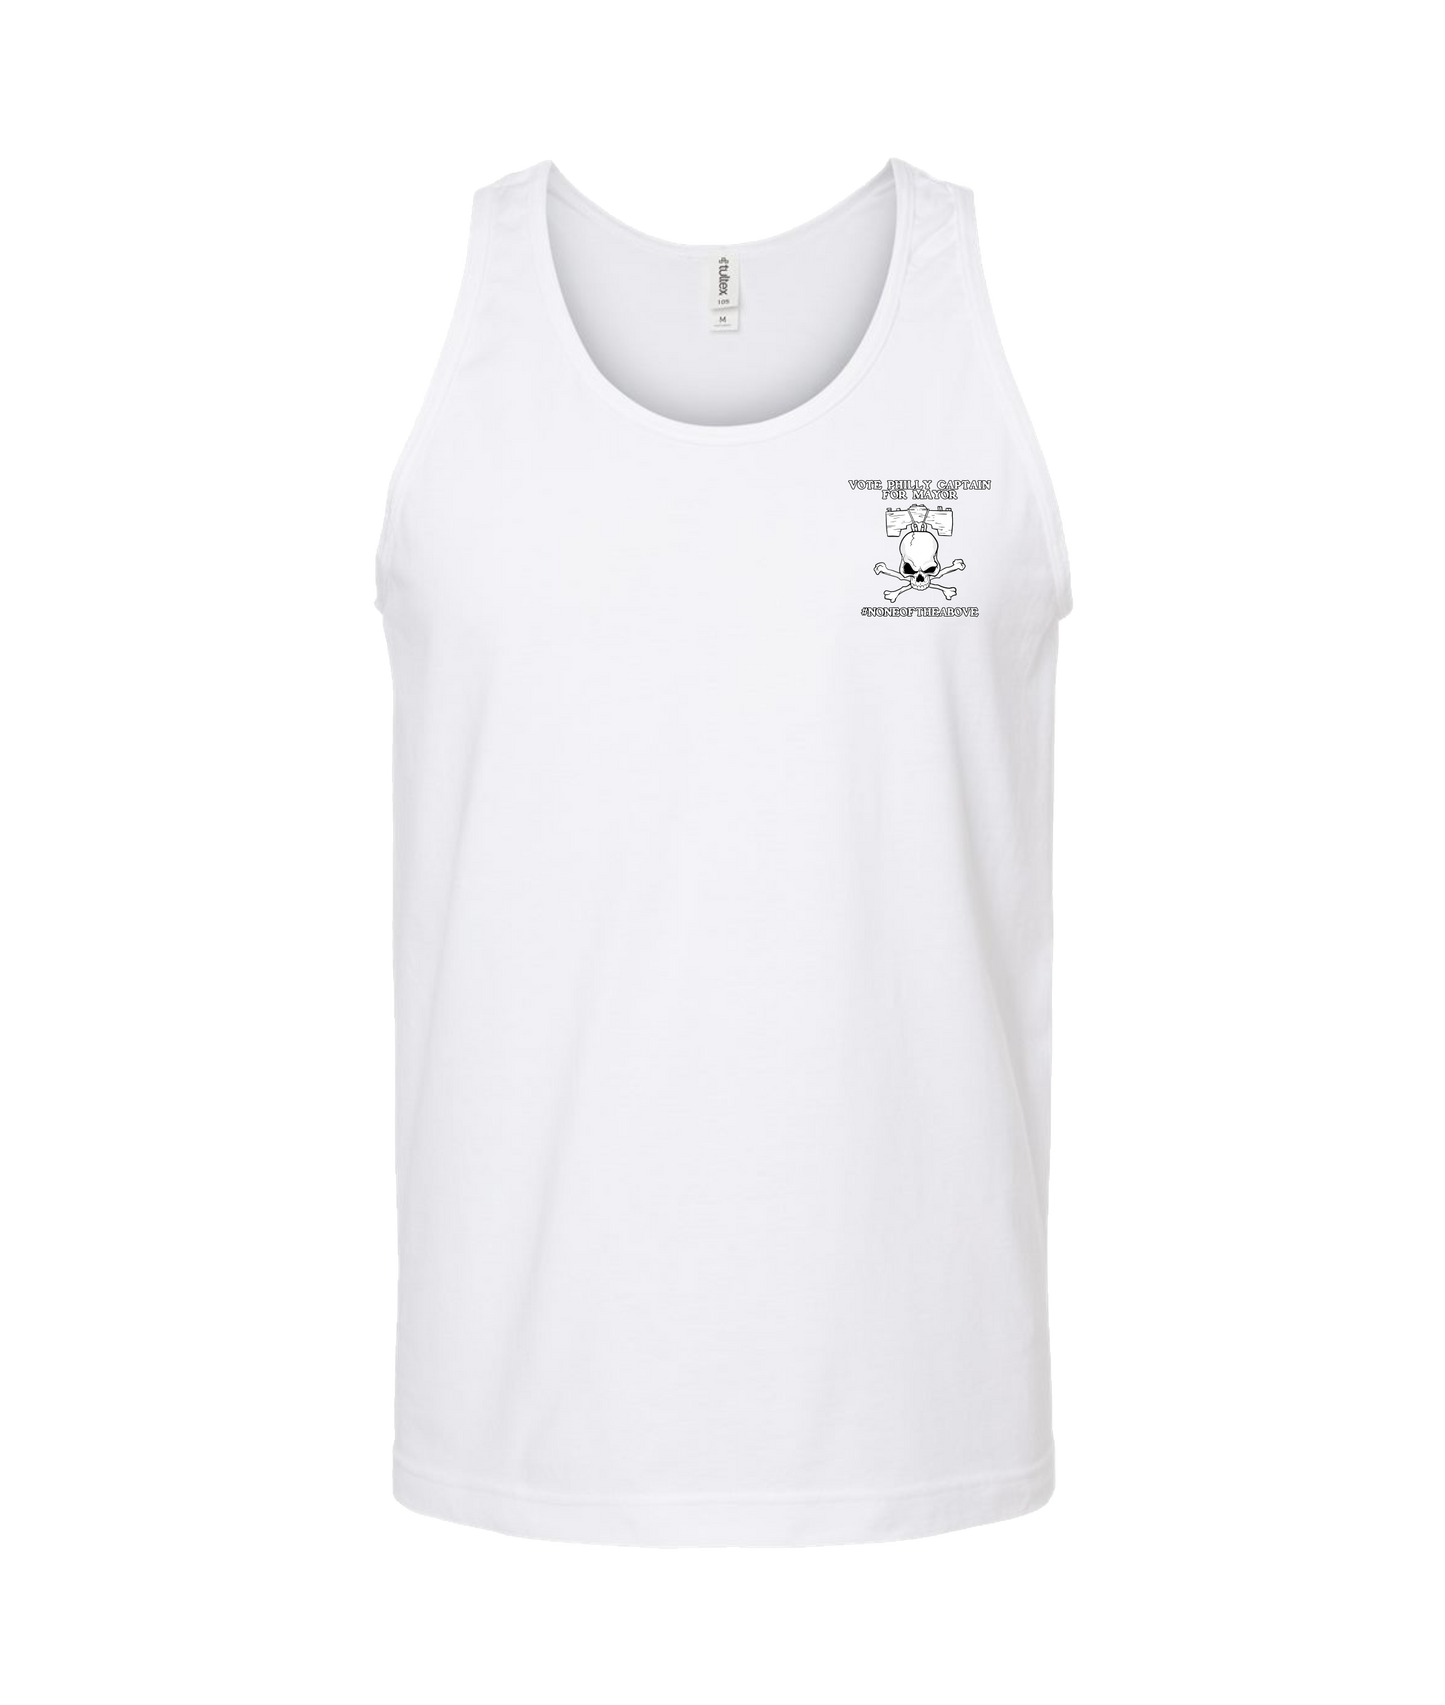 The Philly Captain's Merch is Fire - VOTE - White Tank Top